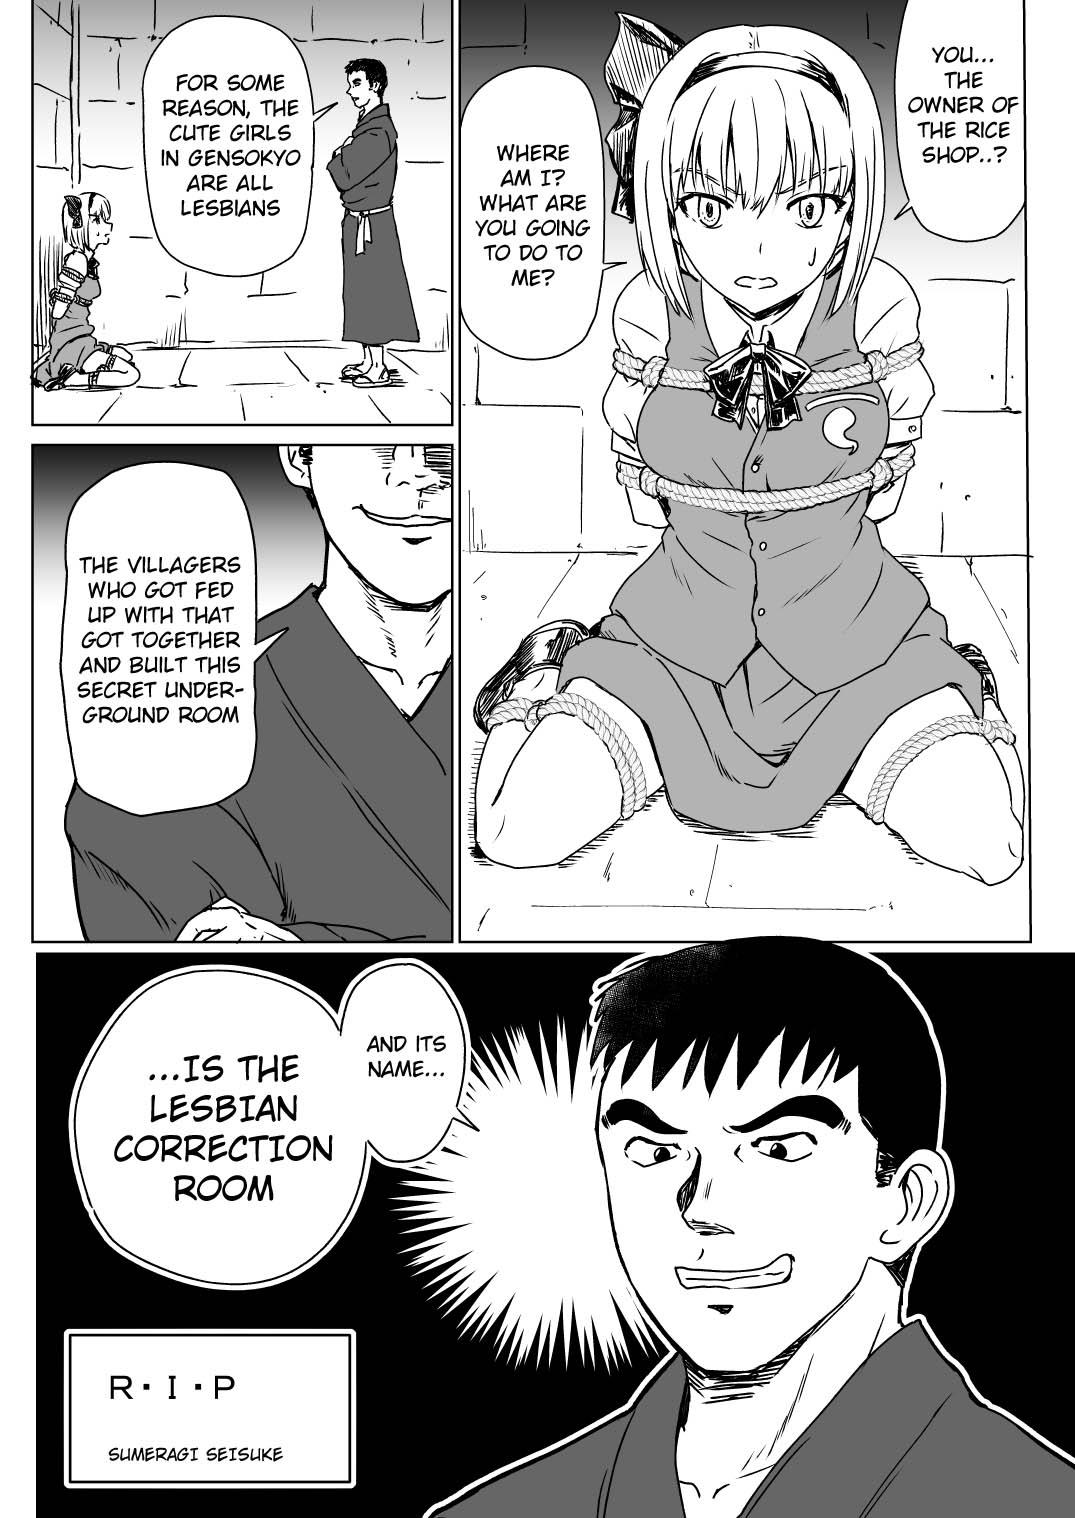 Gym R. I. P. - Touhou project Hot Girl Porn - Page 3